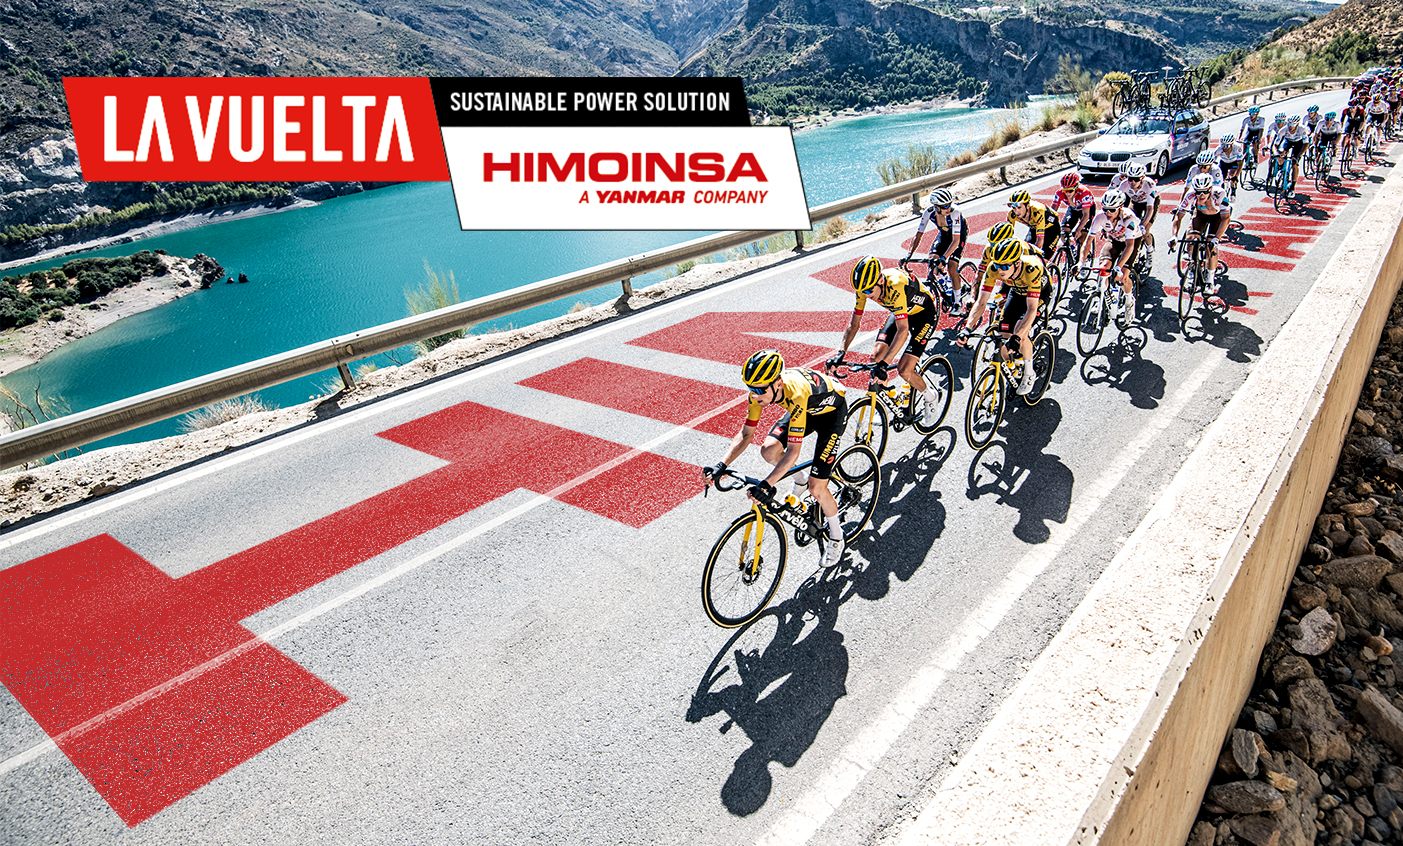 HIMOINSA and La Vuelta join forces to supply sustainable power to Spain's flagship cycling competition